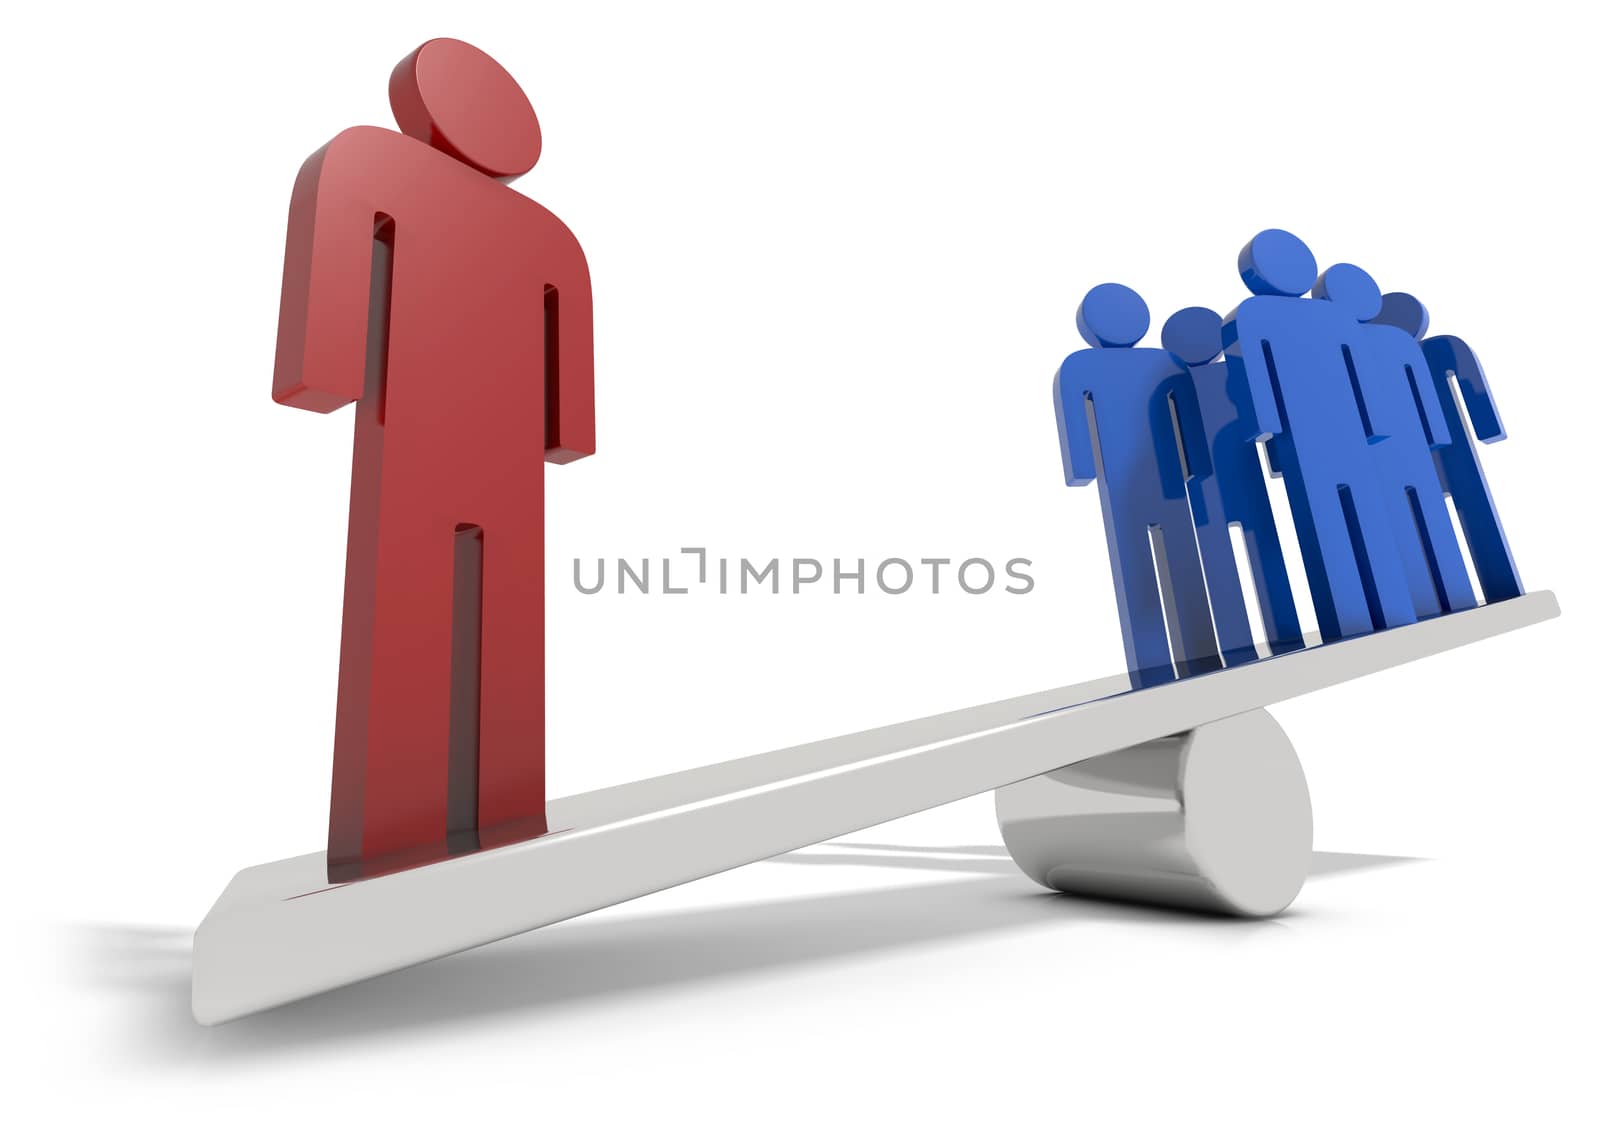 On man out weighing all the others isolated on a white background